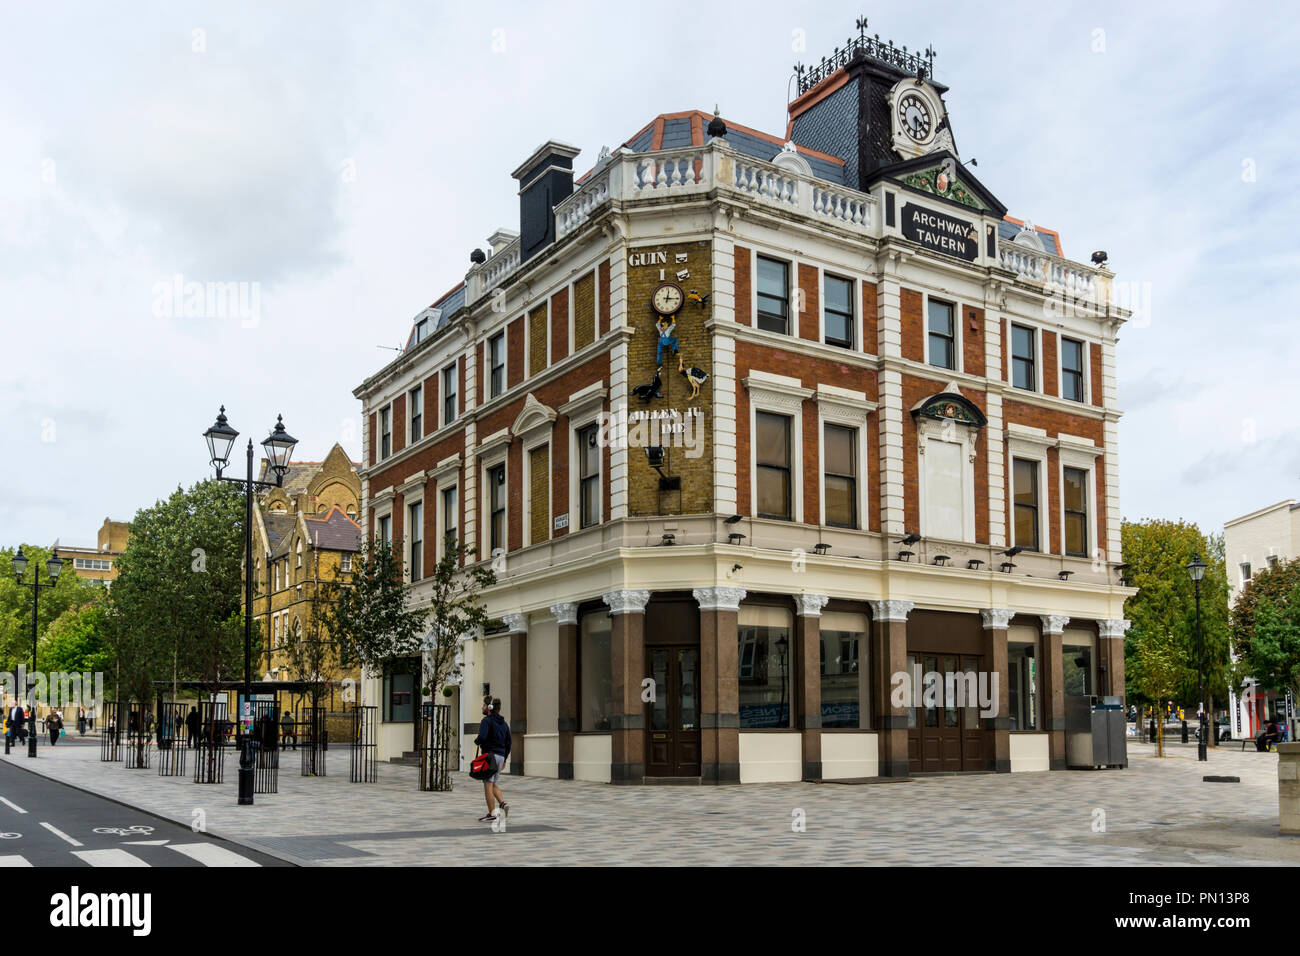 The Archway Tavern public house in Islington, North London. Stock Photo